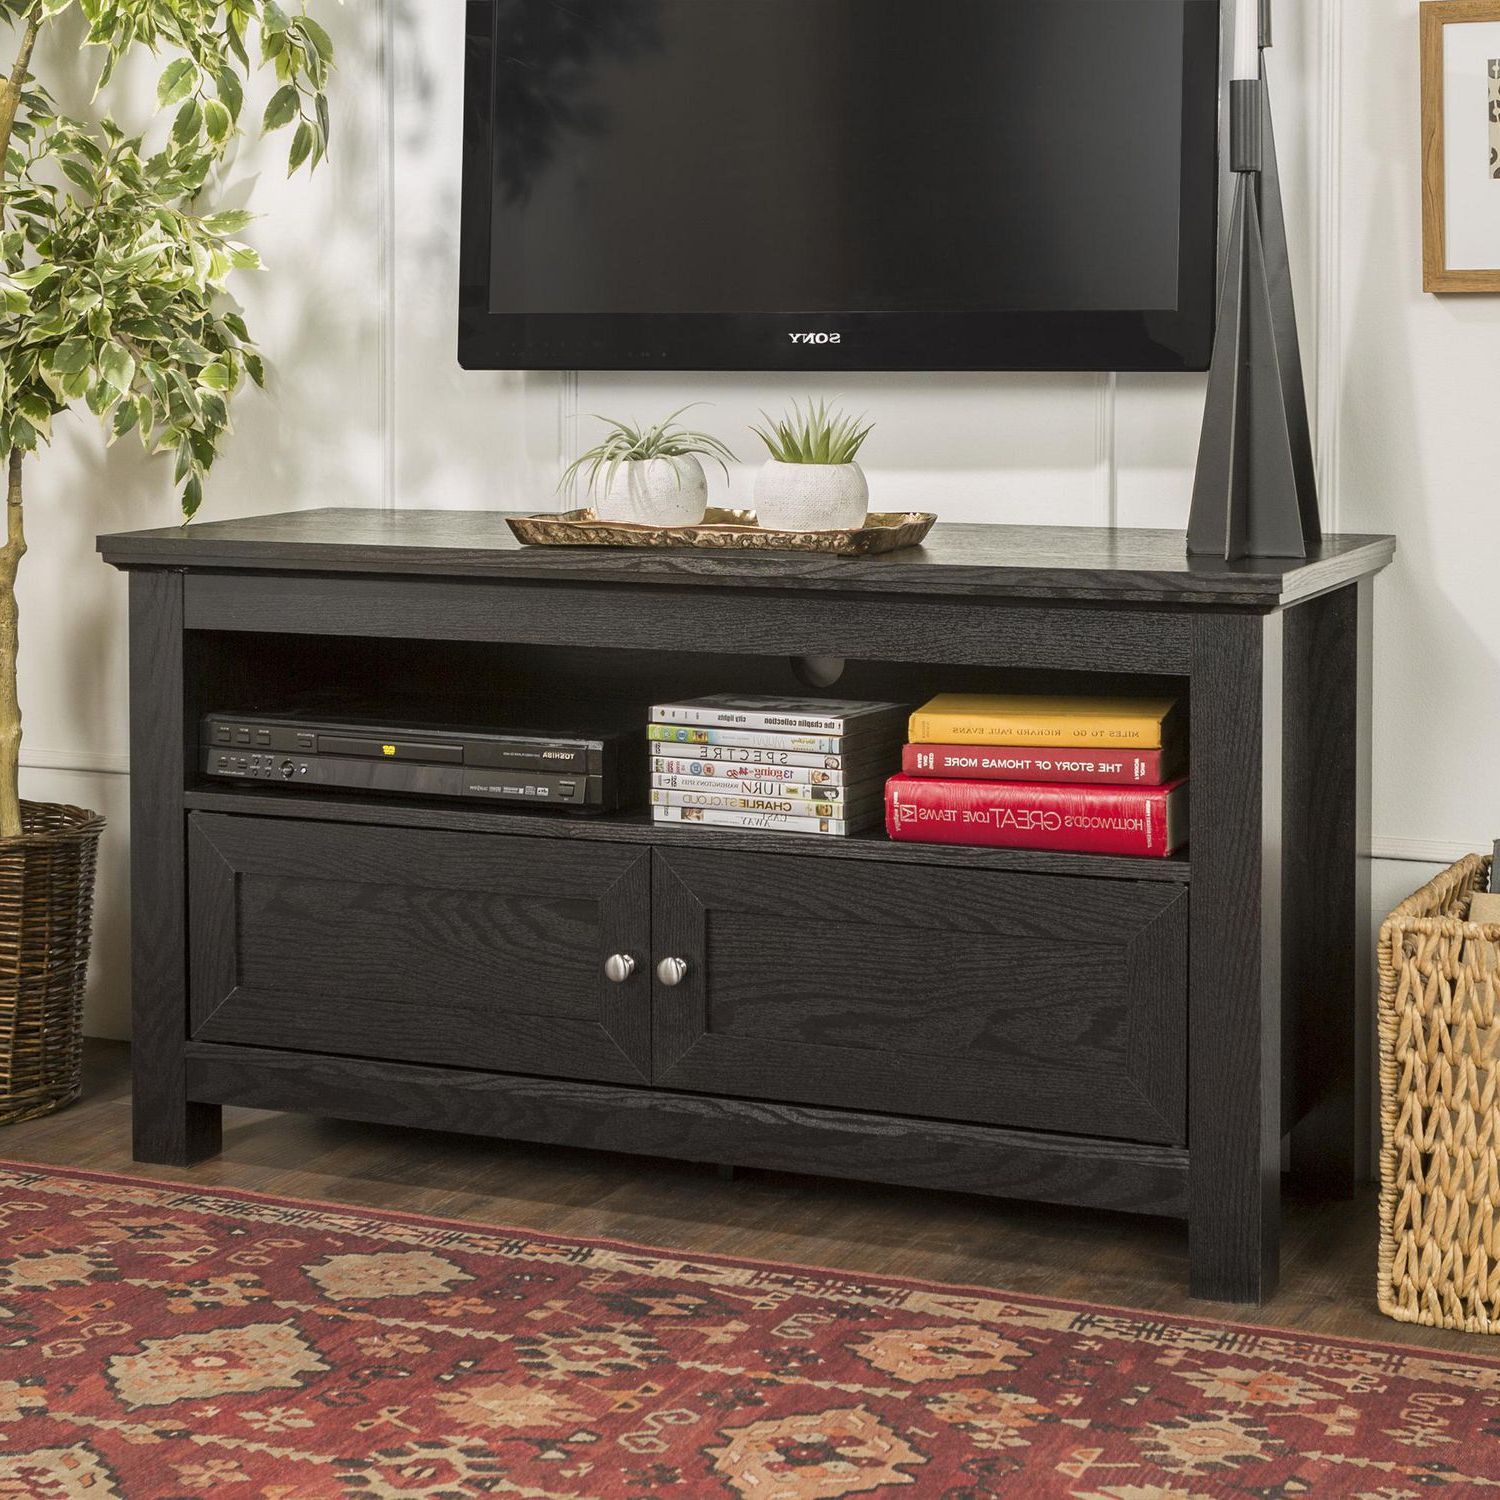 Manor Park Simple Rustic Tv Stand For Tv's Up To 48 With Regard To Urban Rustic Tv Stands (View 2 of 20)